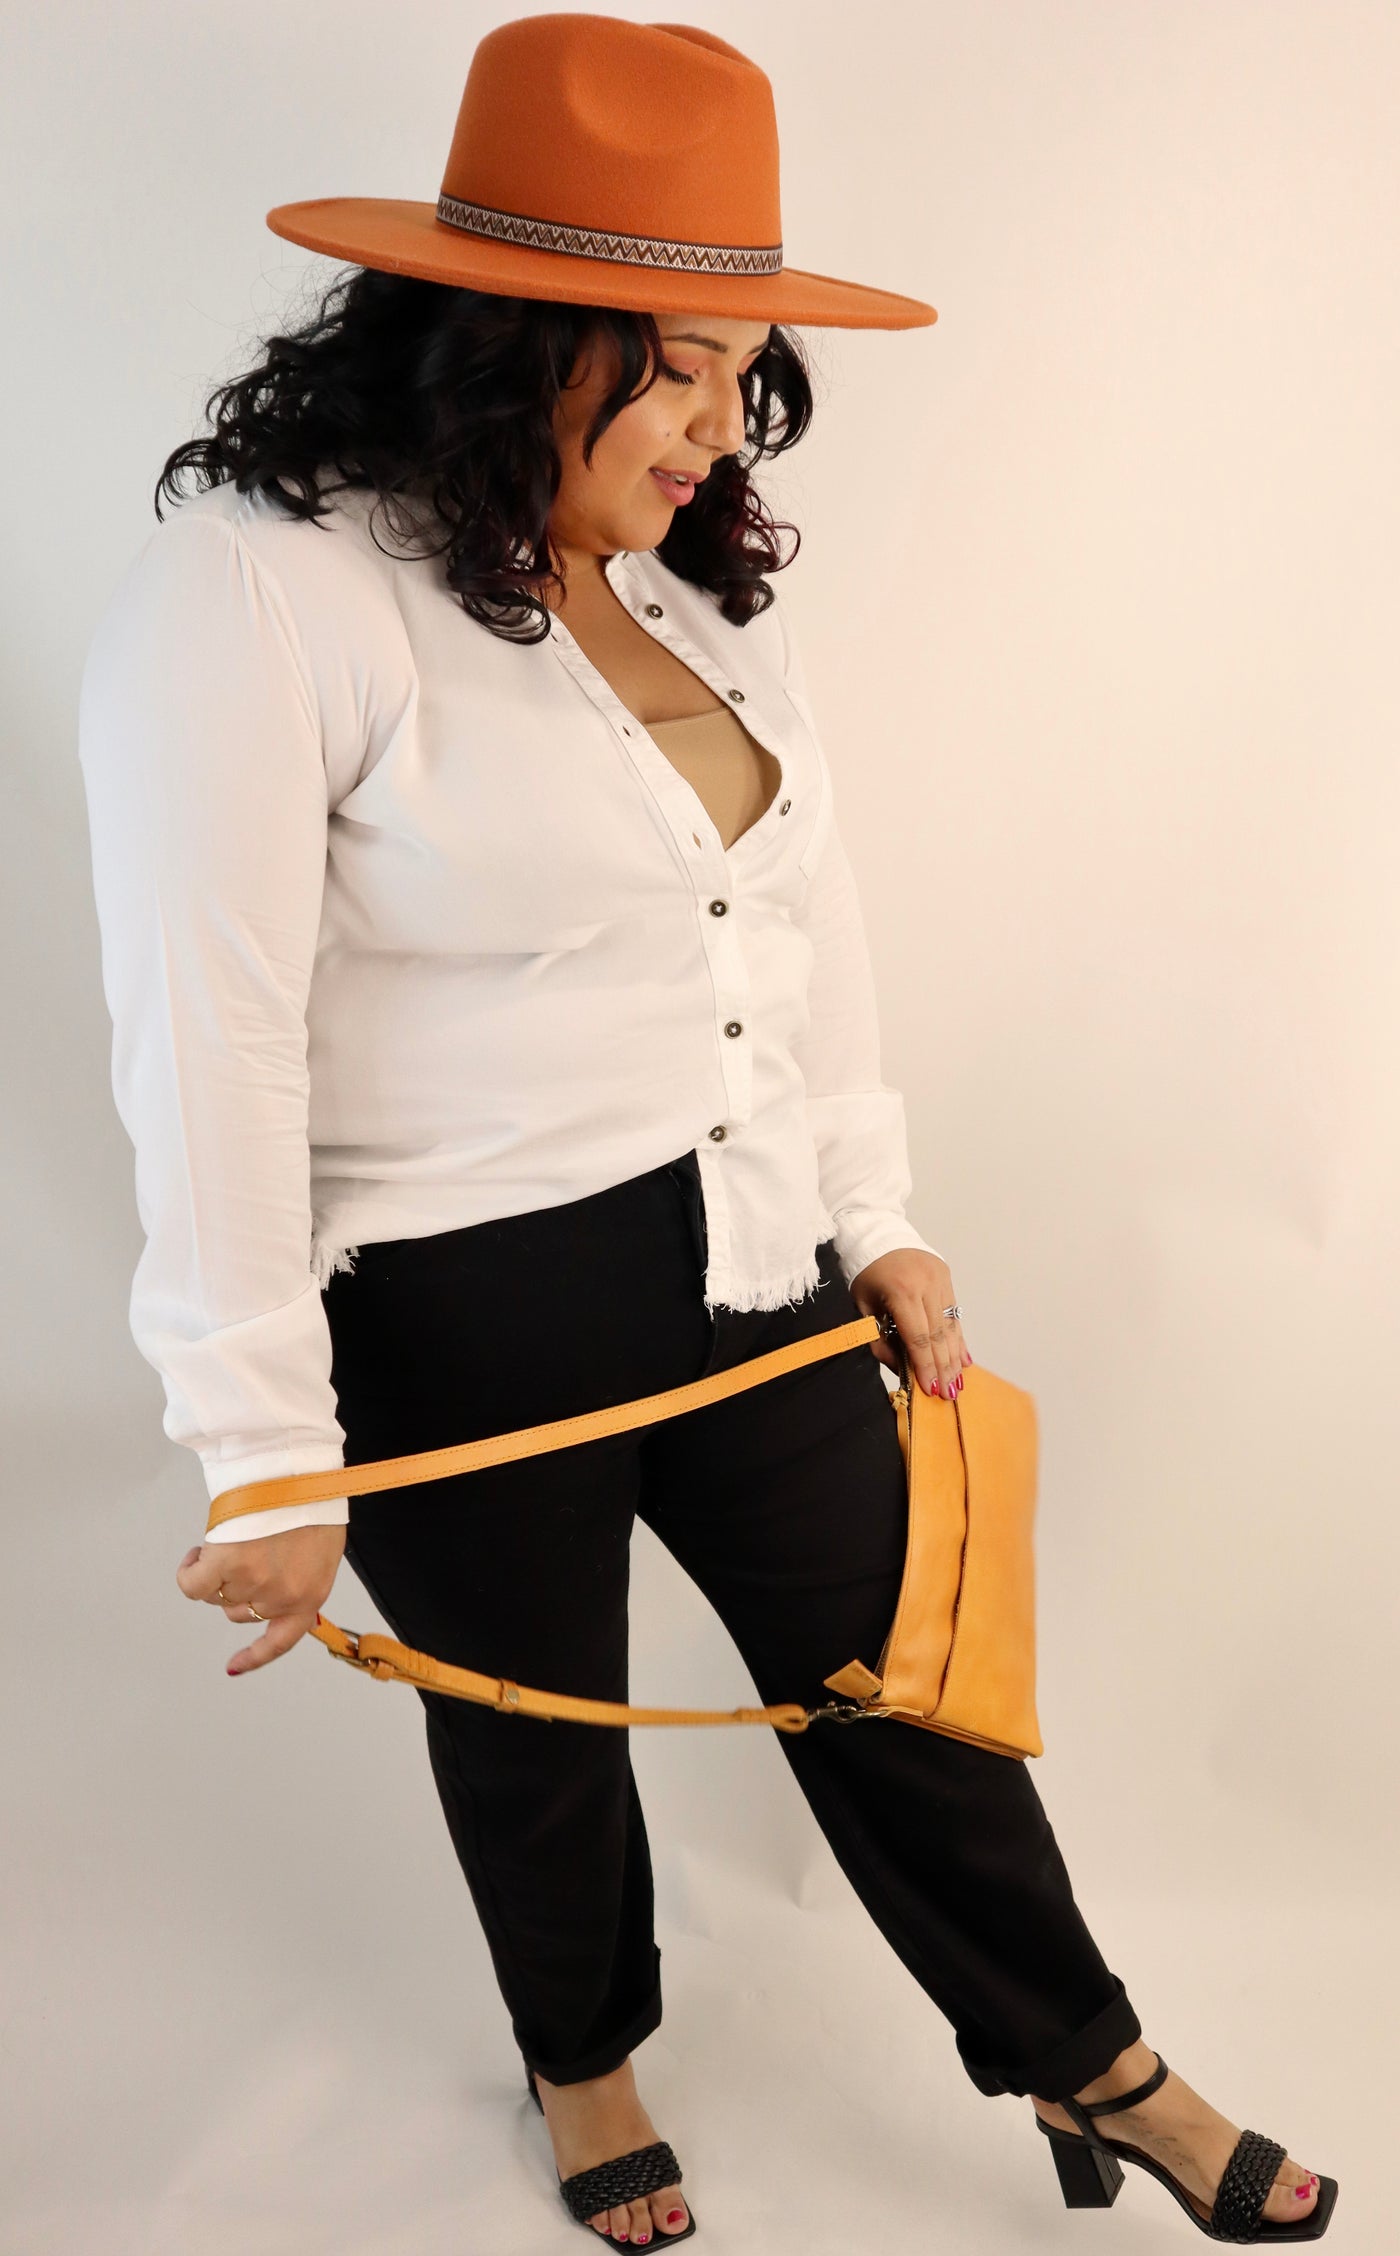 High quality leather crossbody purse made by hand by women that are paid a living wage. Cognac colored purse in buttery leather. Lots of pockets and detachable shoulder strap makes it great for traveling.